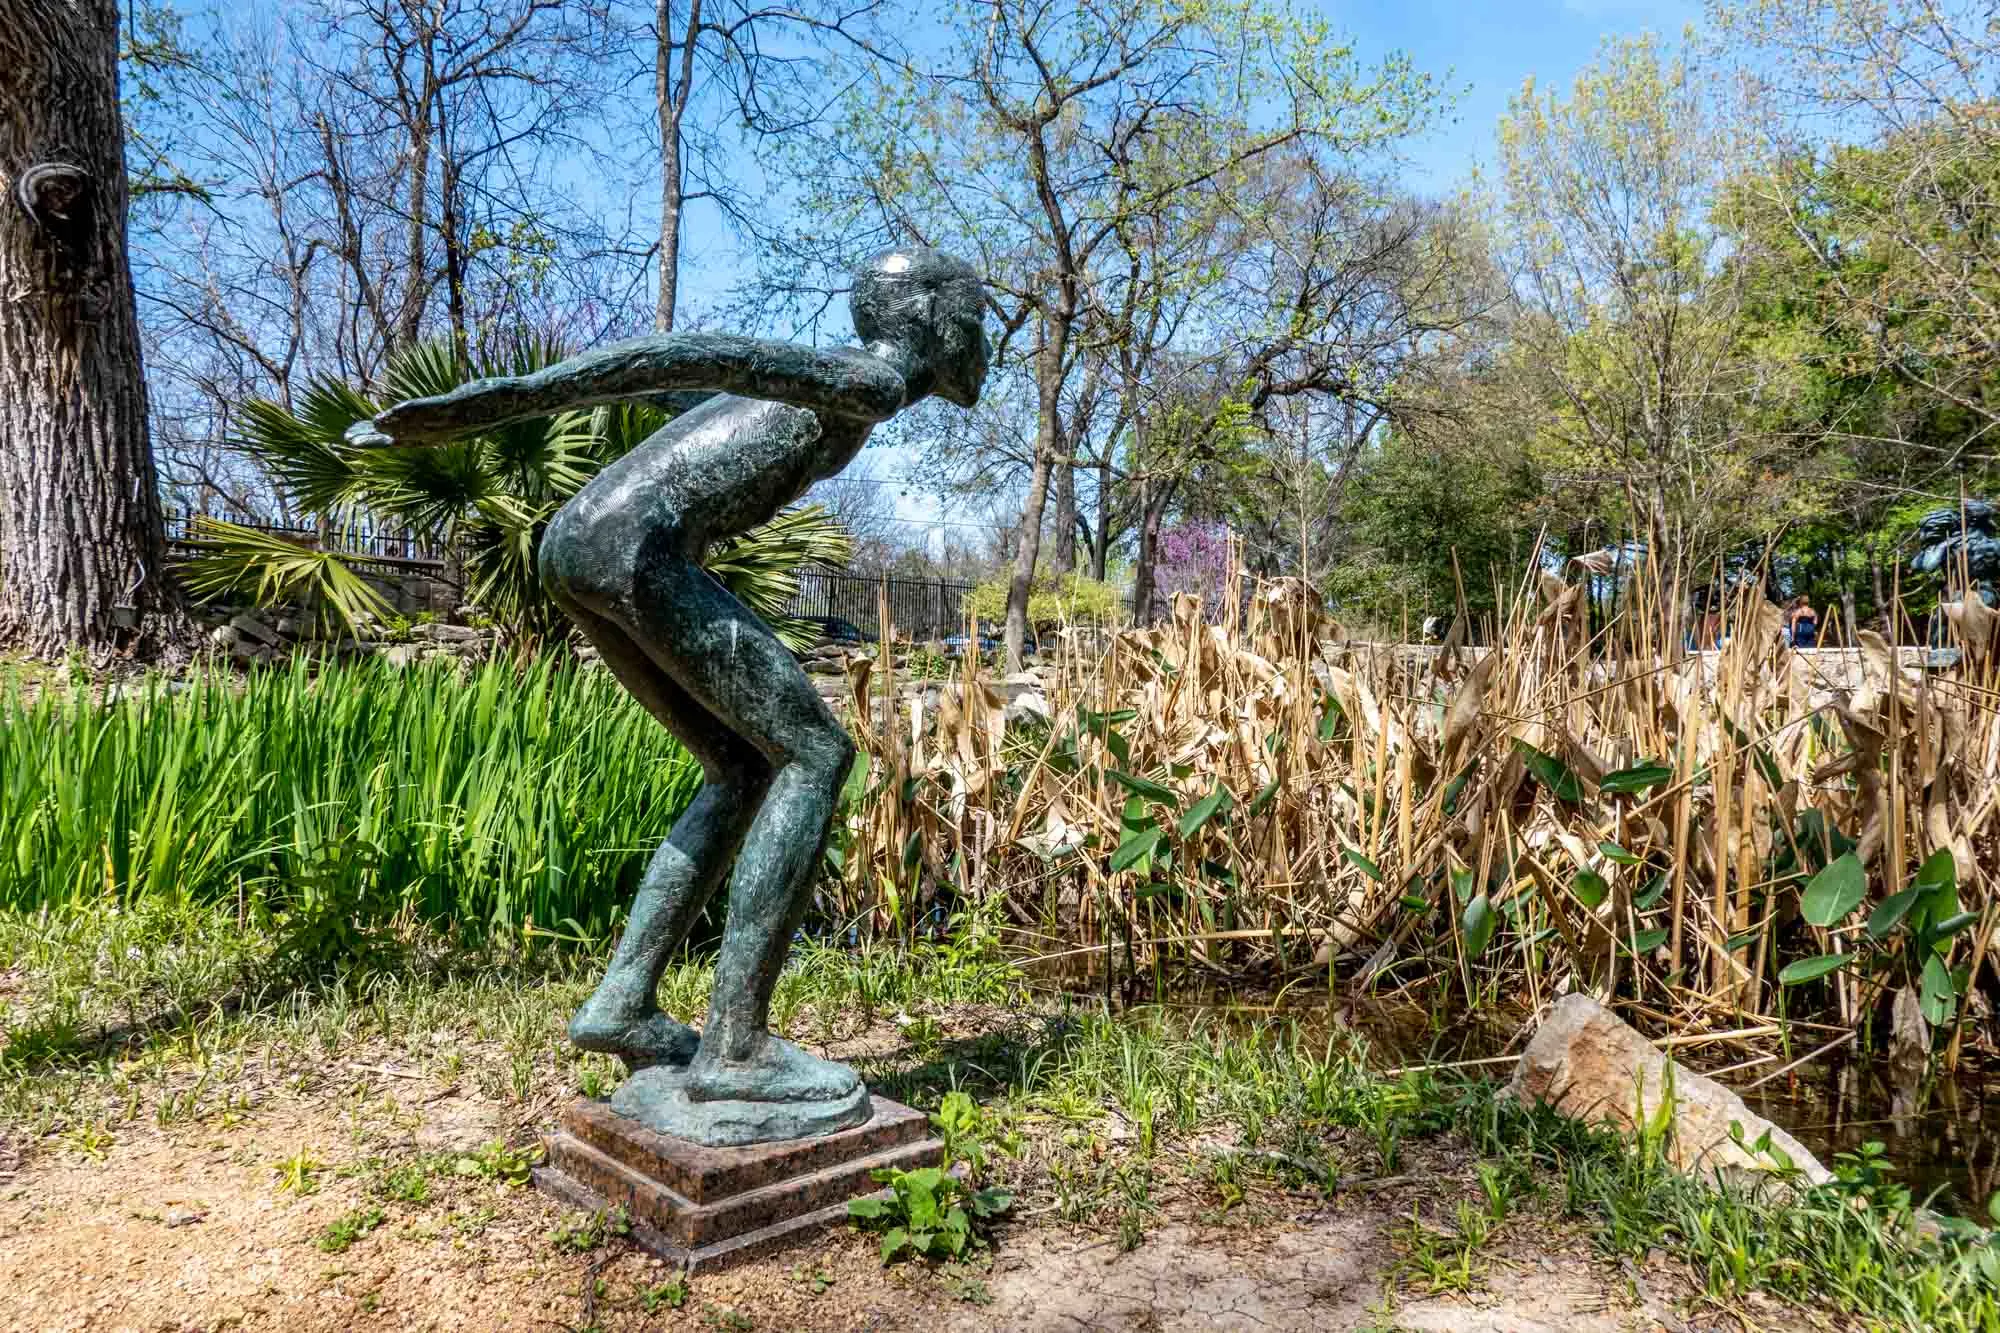 Bronze sculpture of a child jumping into a pond filled with reeds